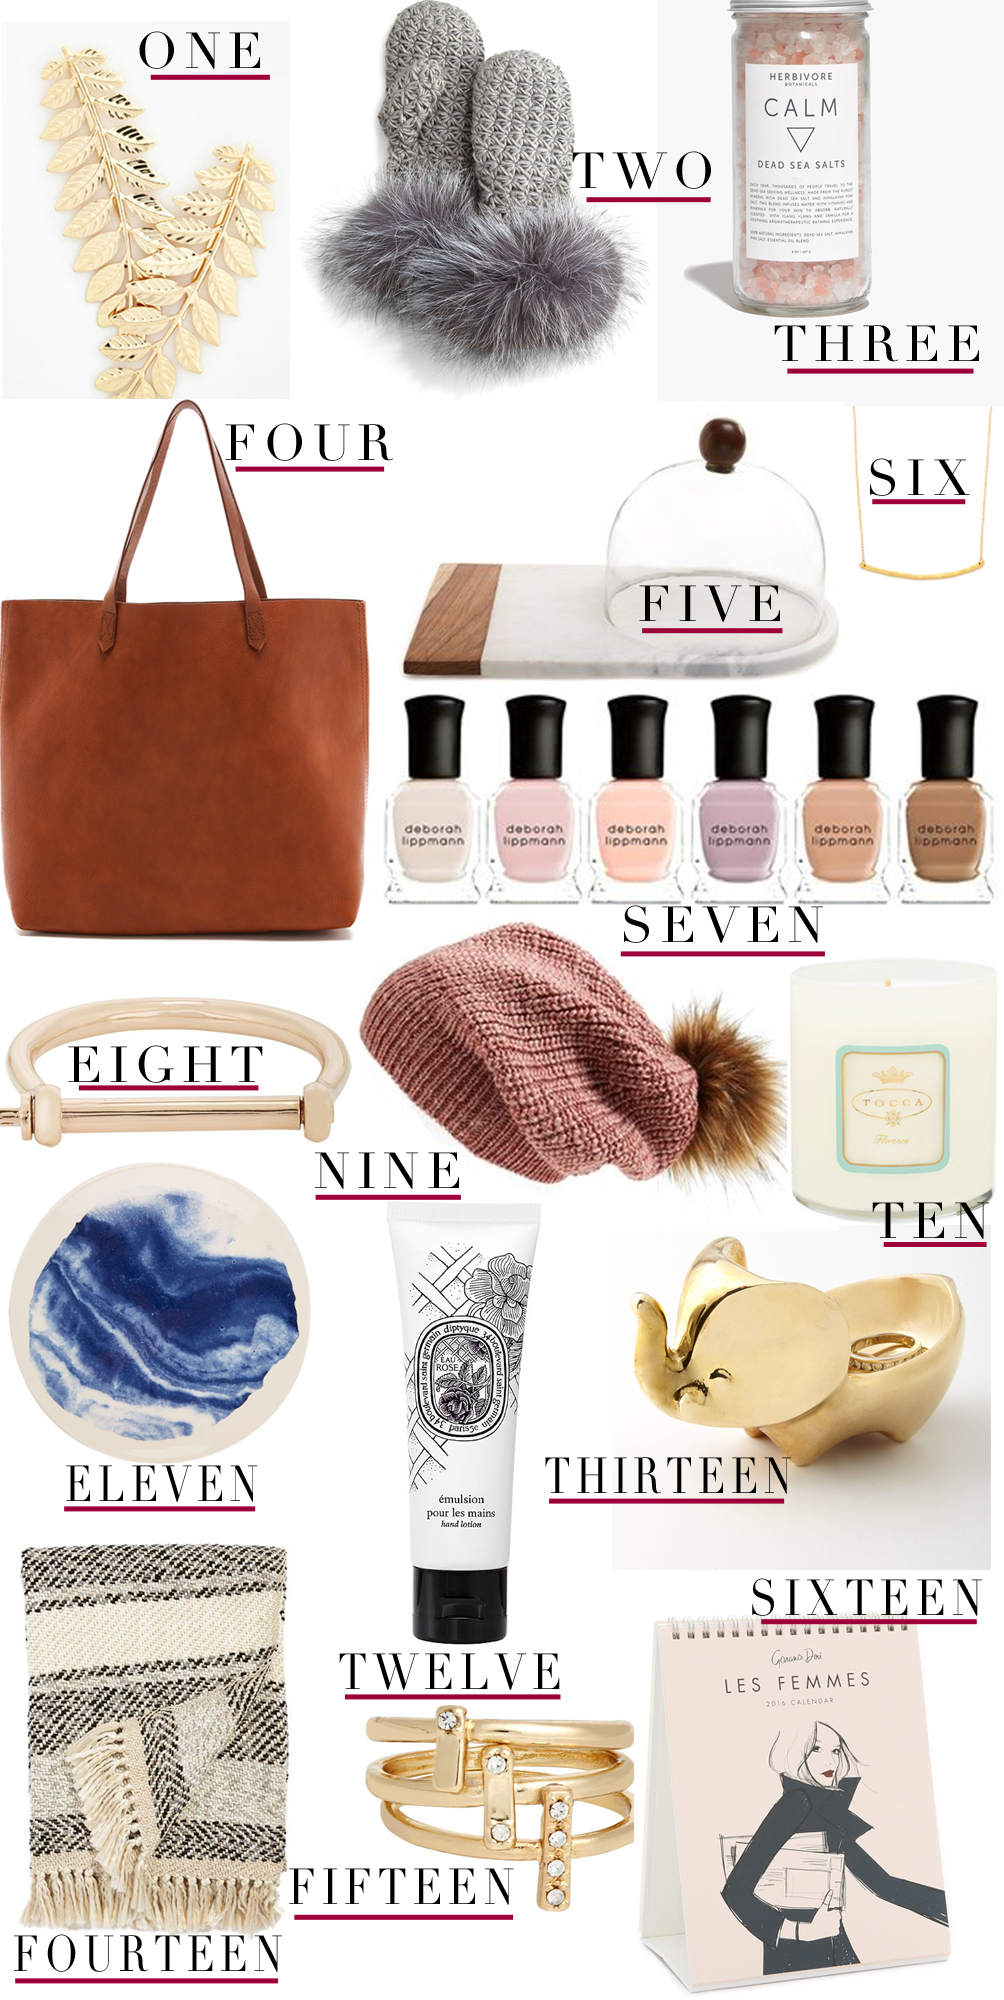 Girlfriends Gift Guide 2015_edited-1